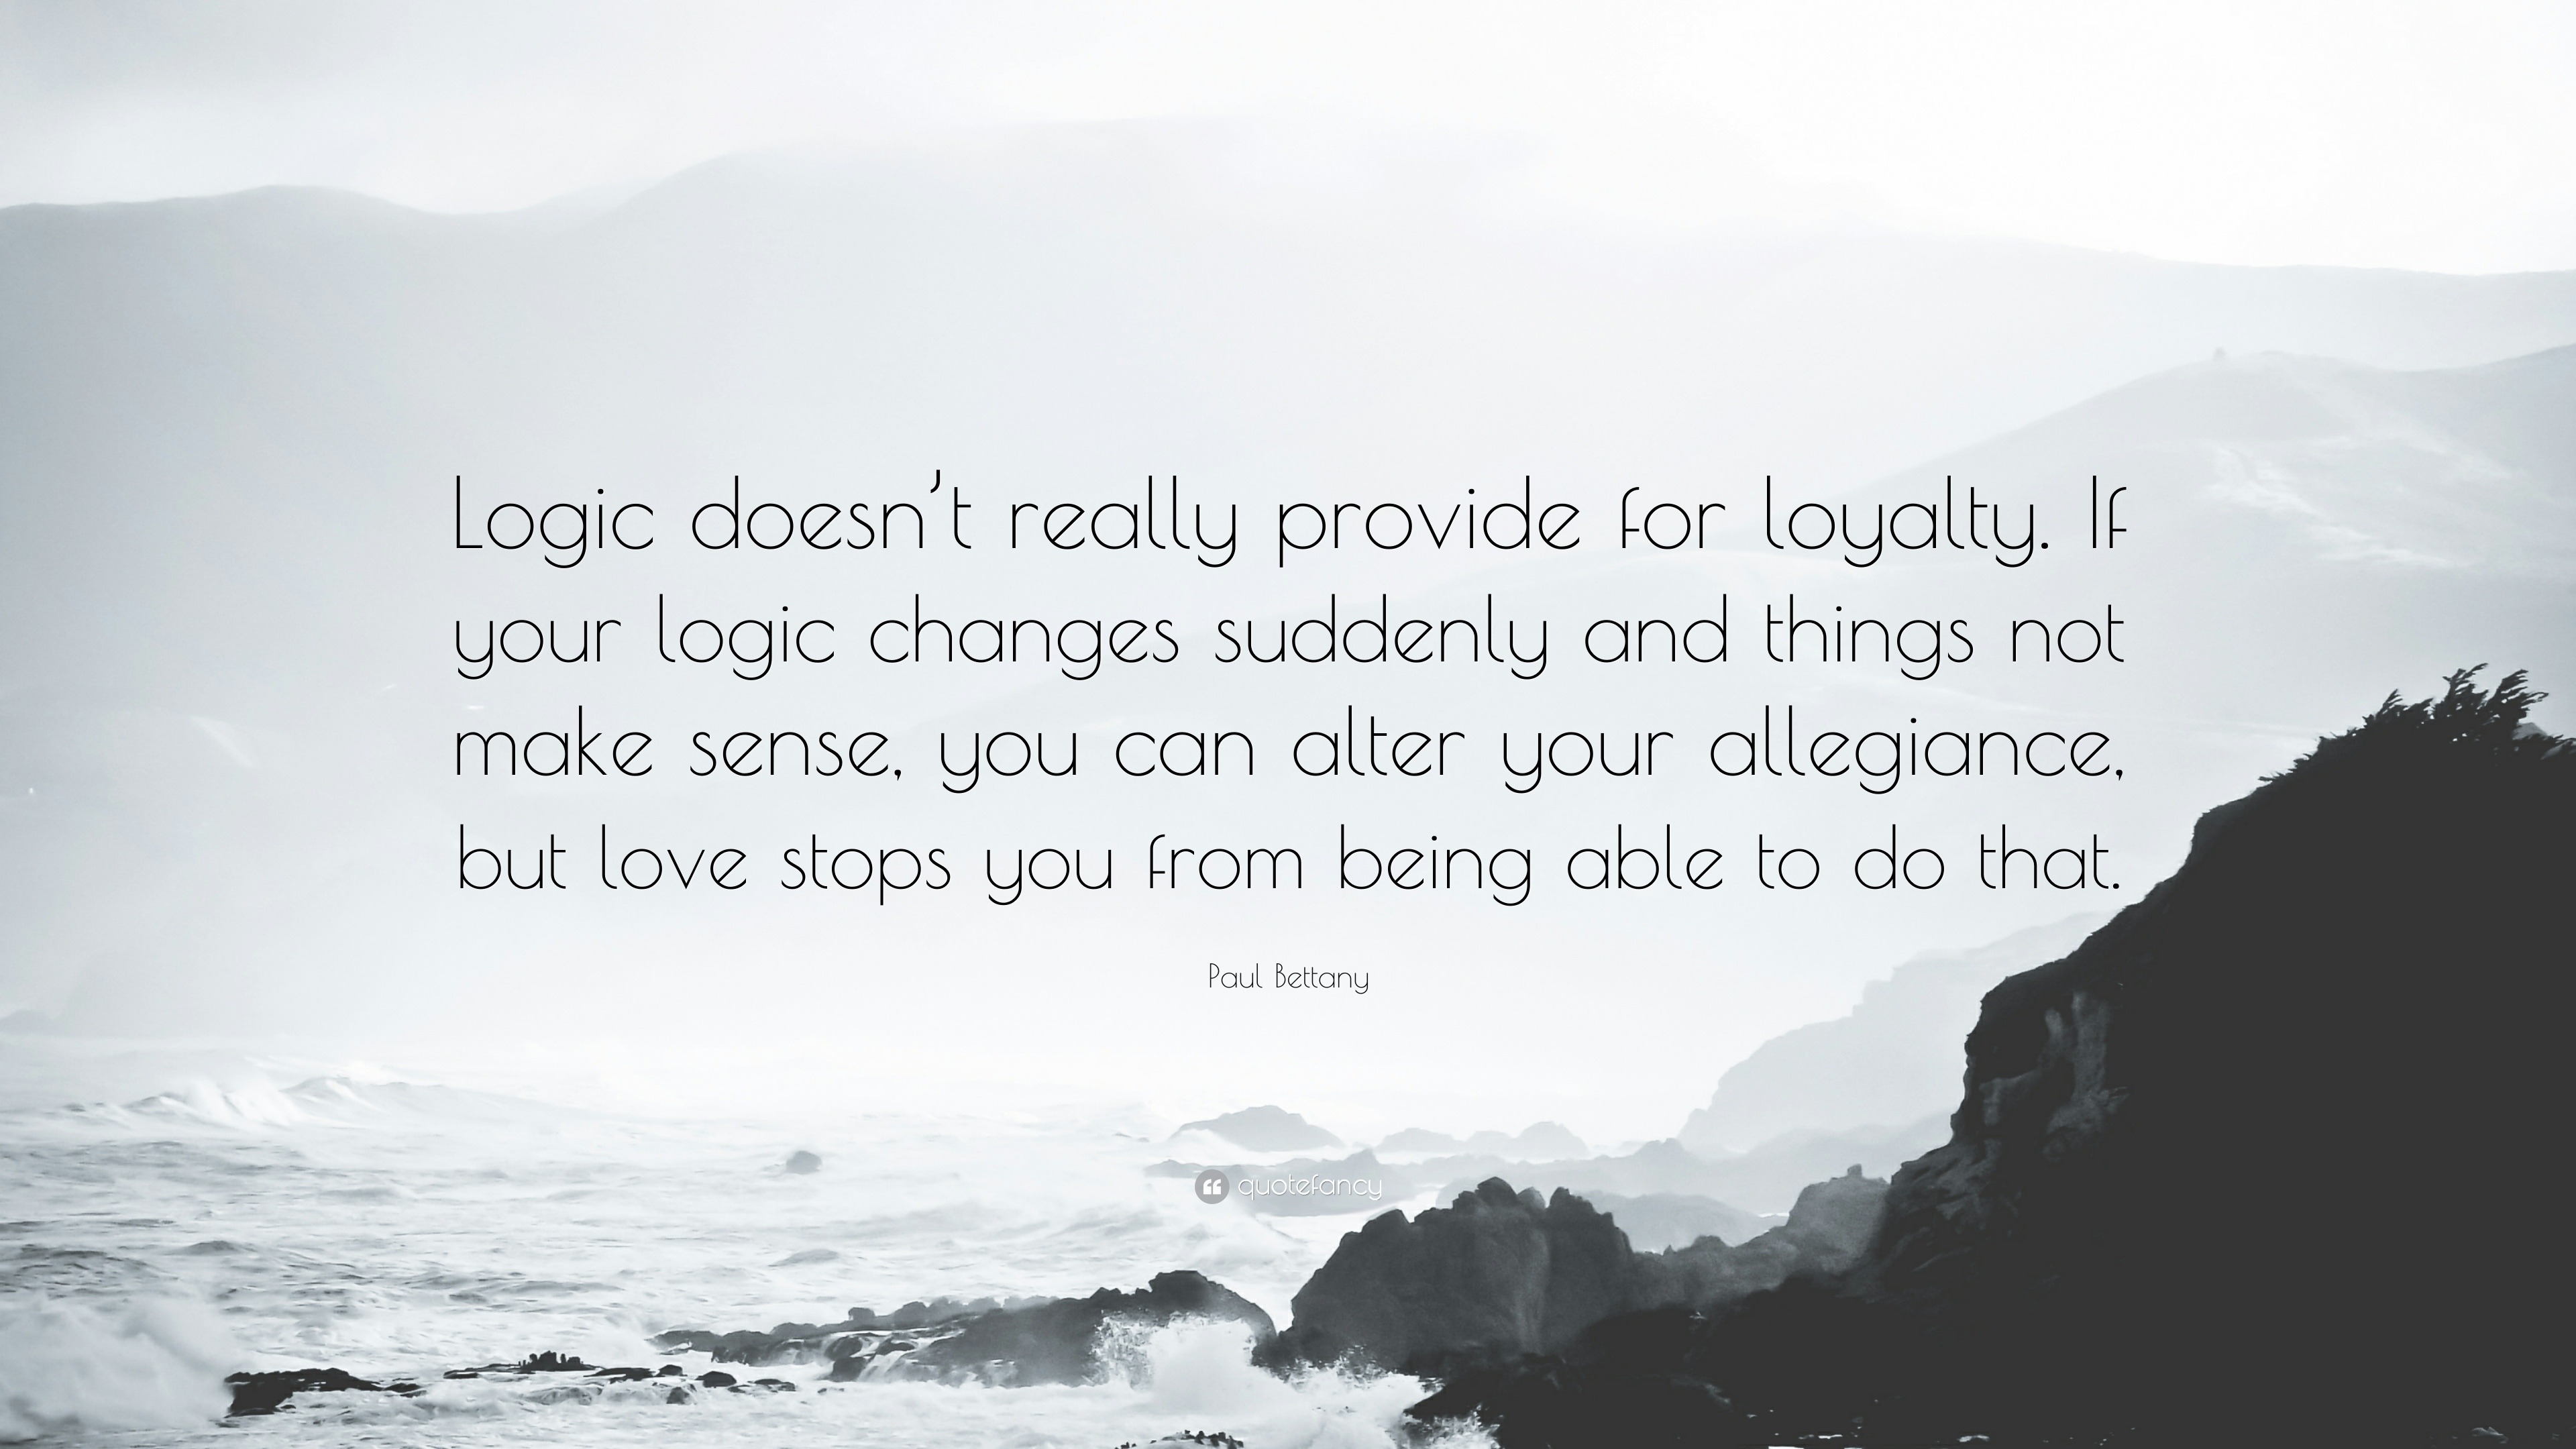 Paul Bettany Quote “Logic doesn t really provide for loyalty If your